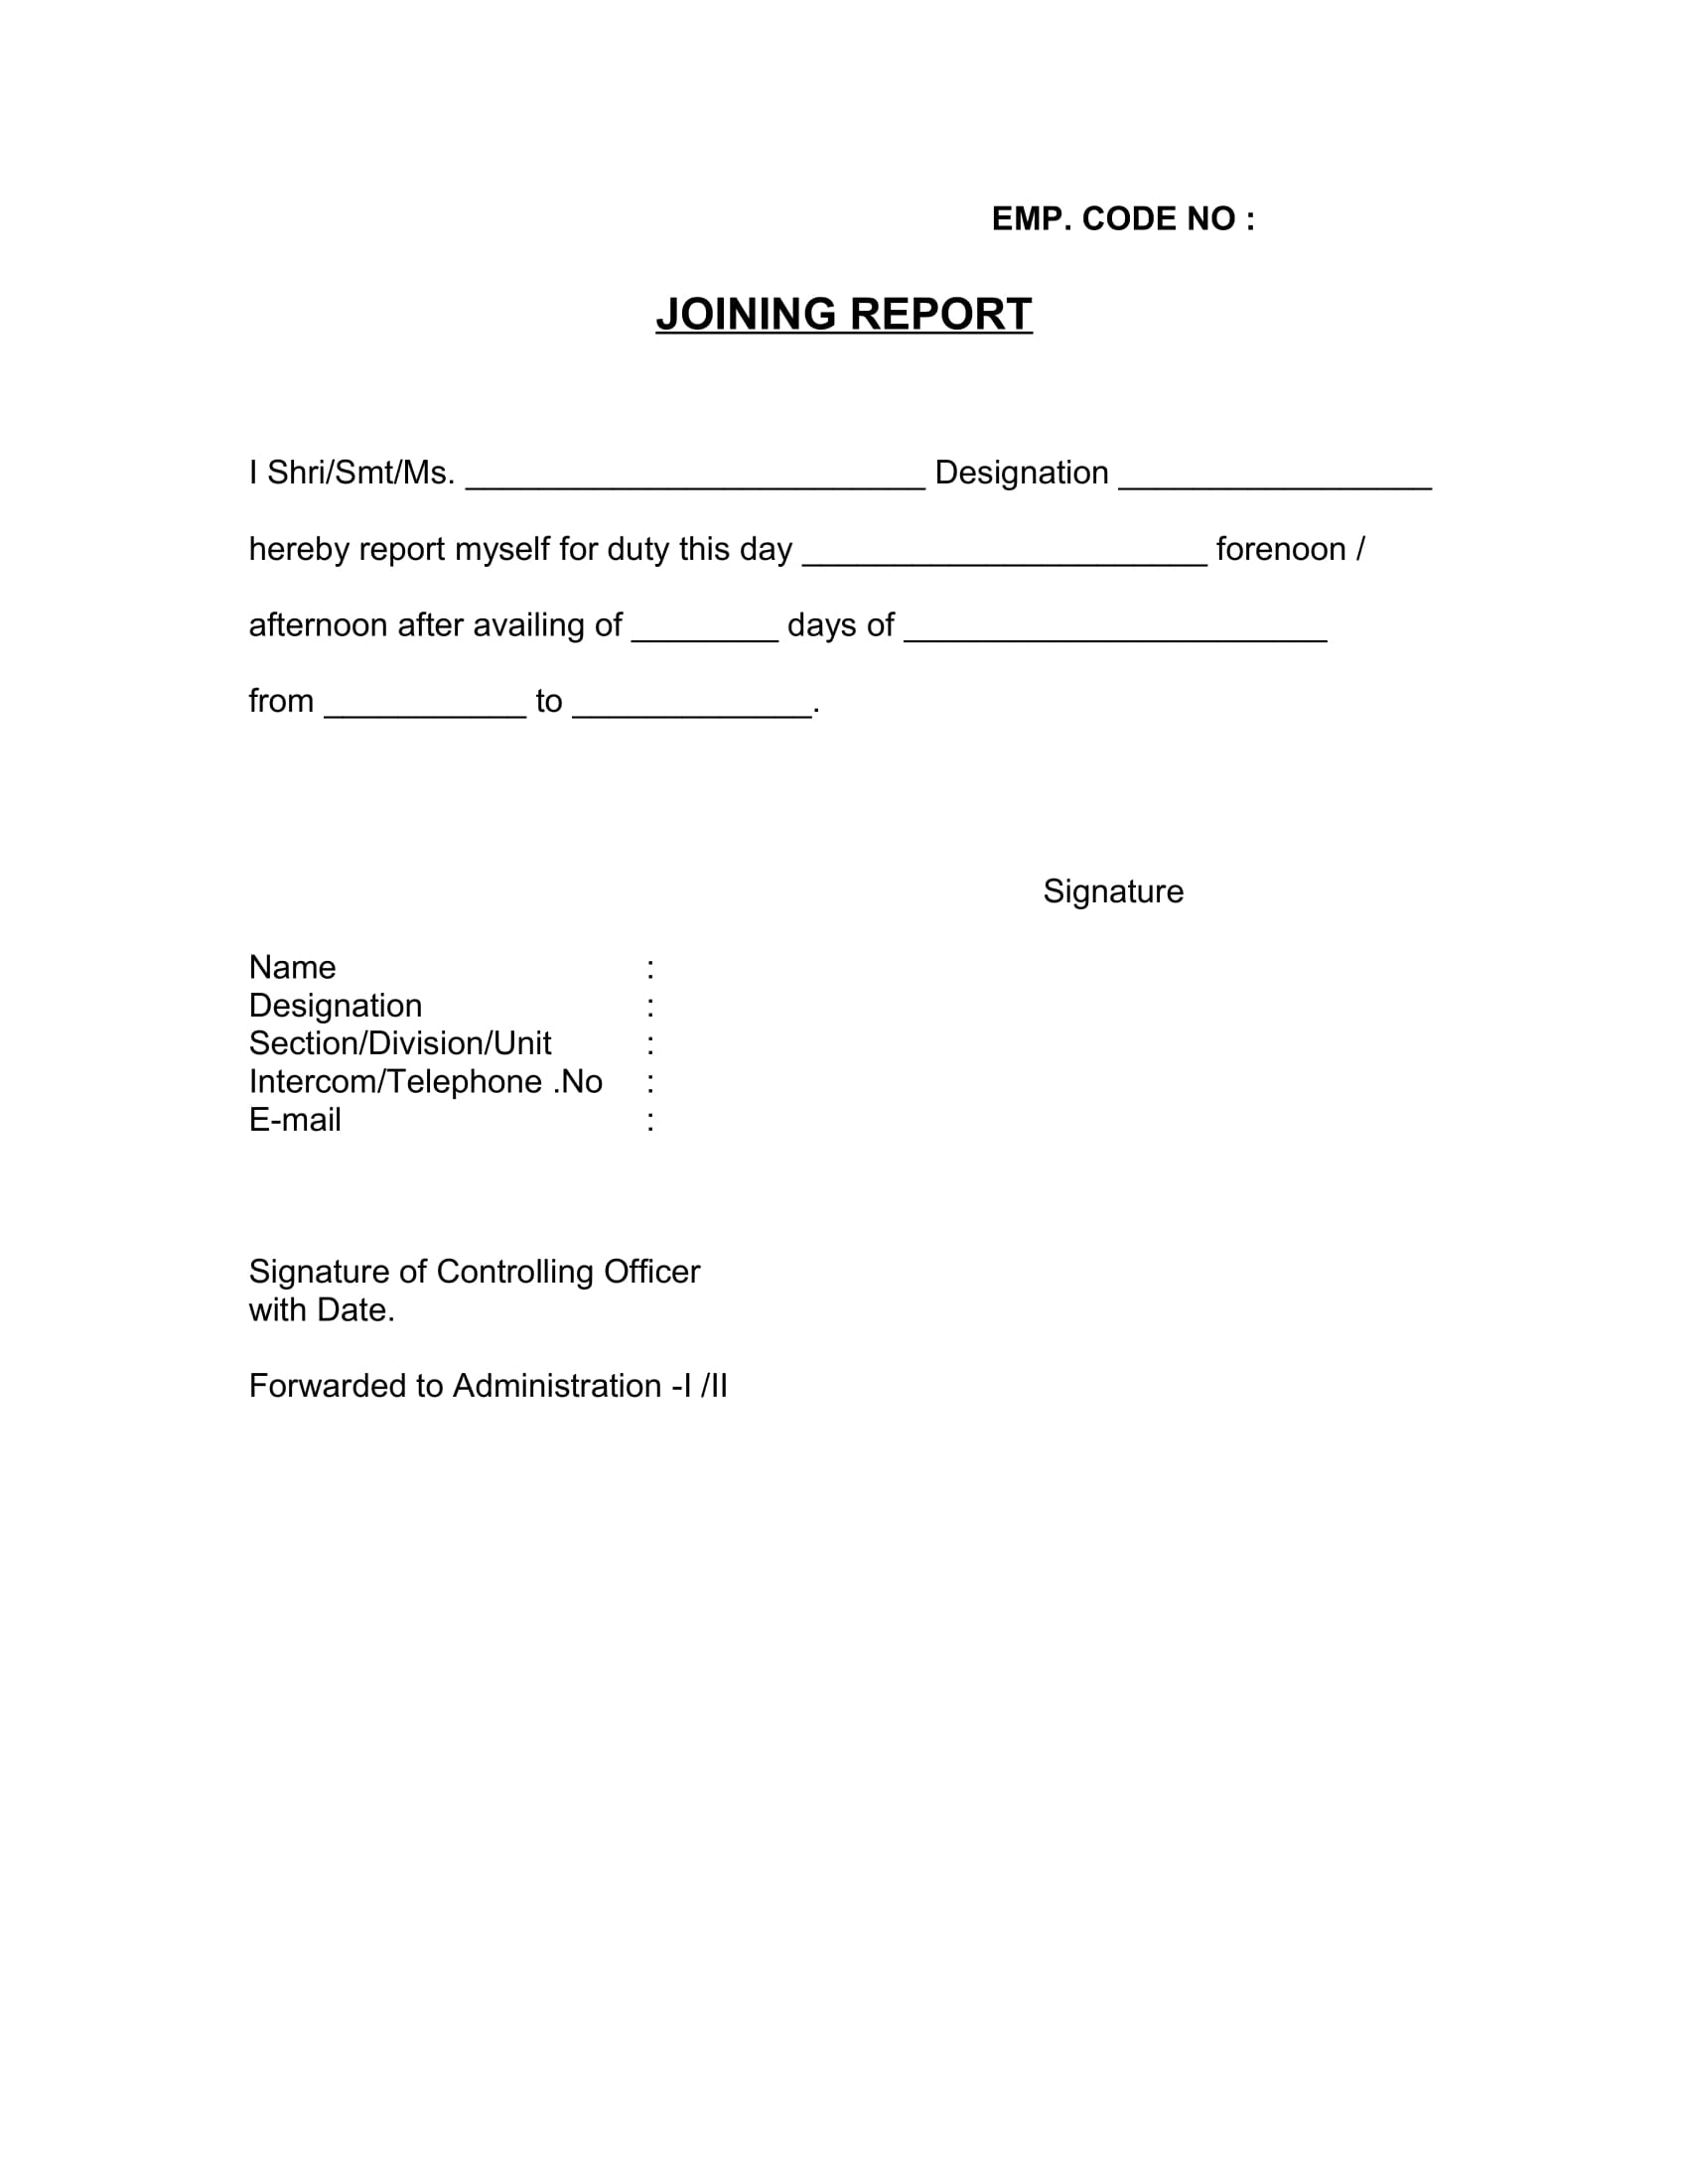 free 14 joining report forms in pdf ms word how to write a medical for patient sample what is subject photography